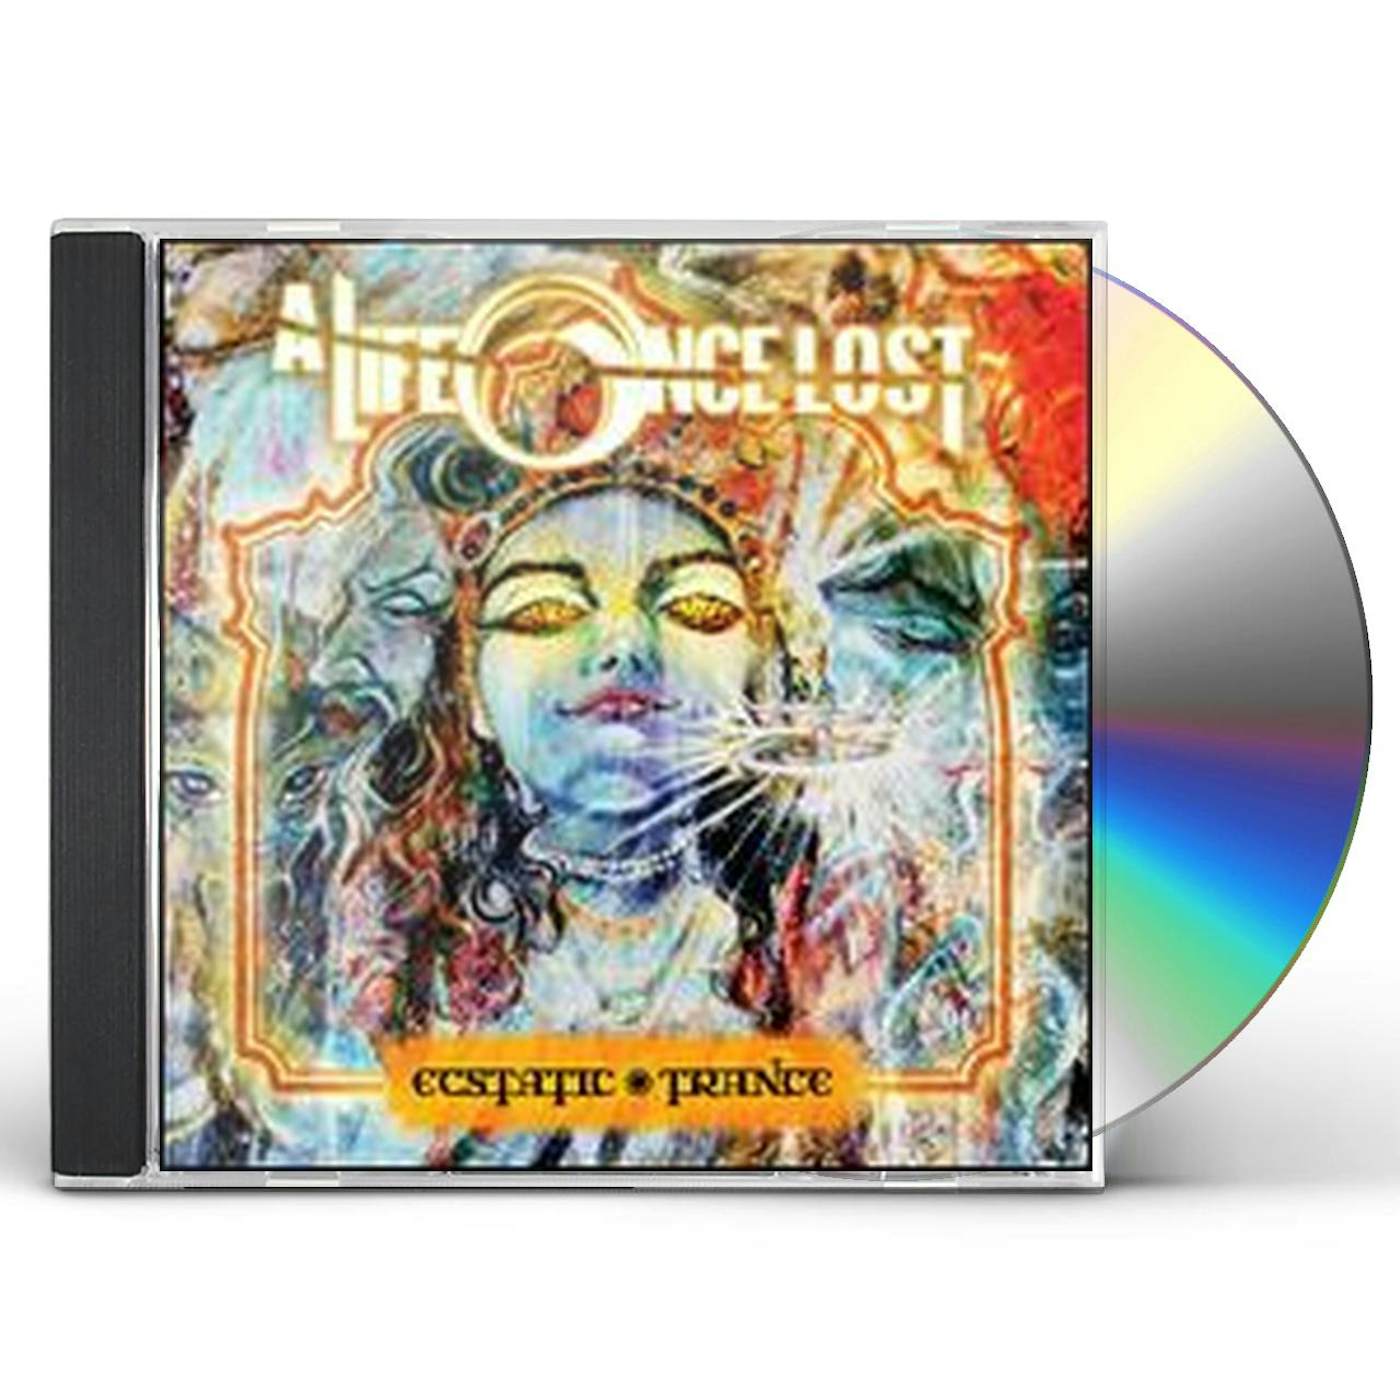 A Life Once Lost ECSTATIC TRANCE CD